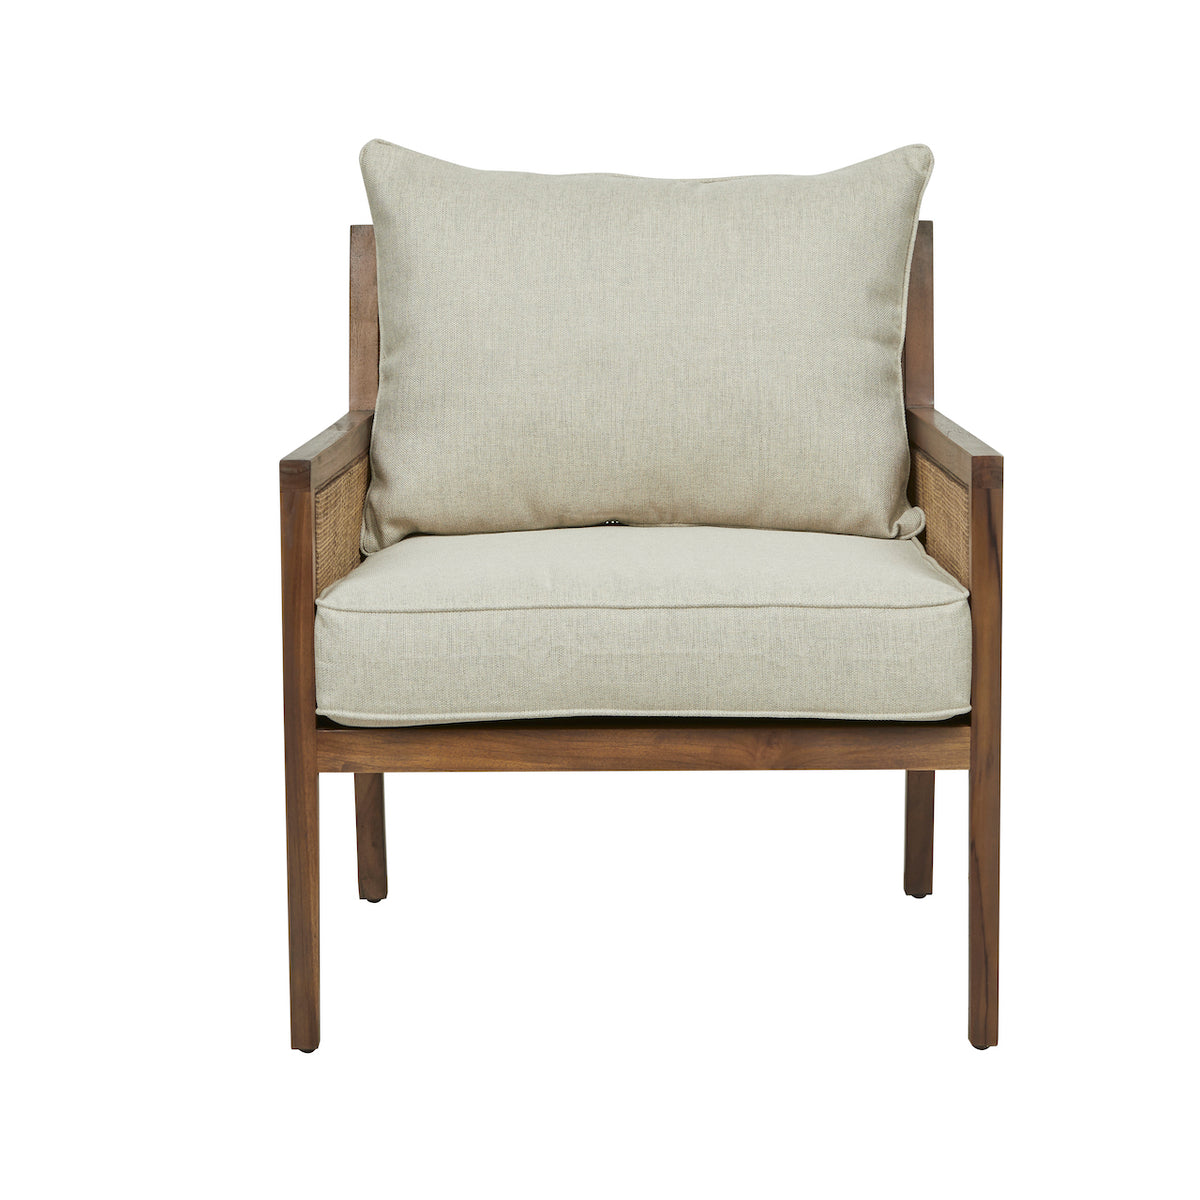 Adeline Square Occasional Chair